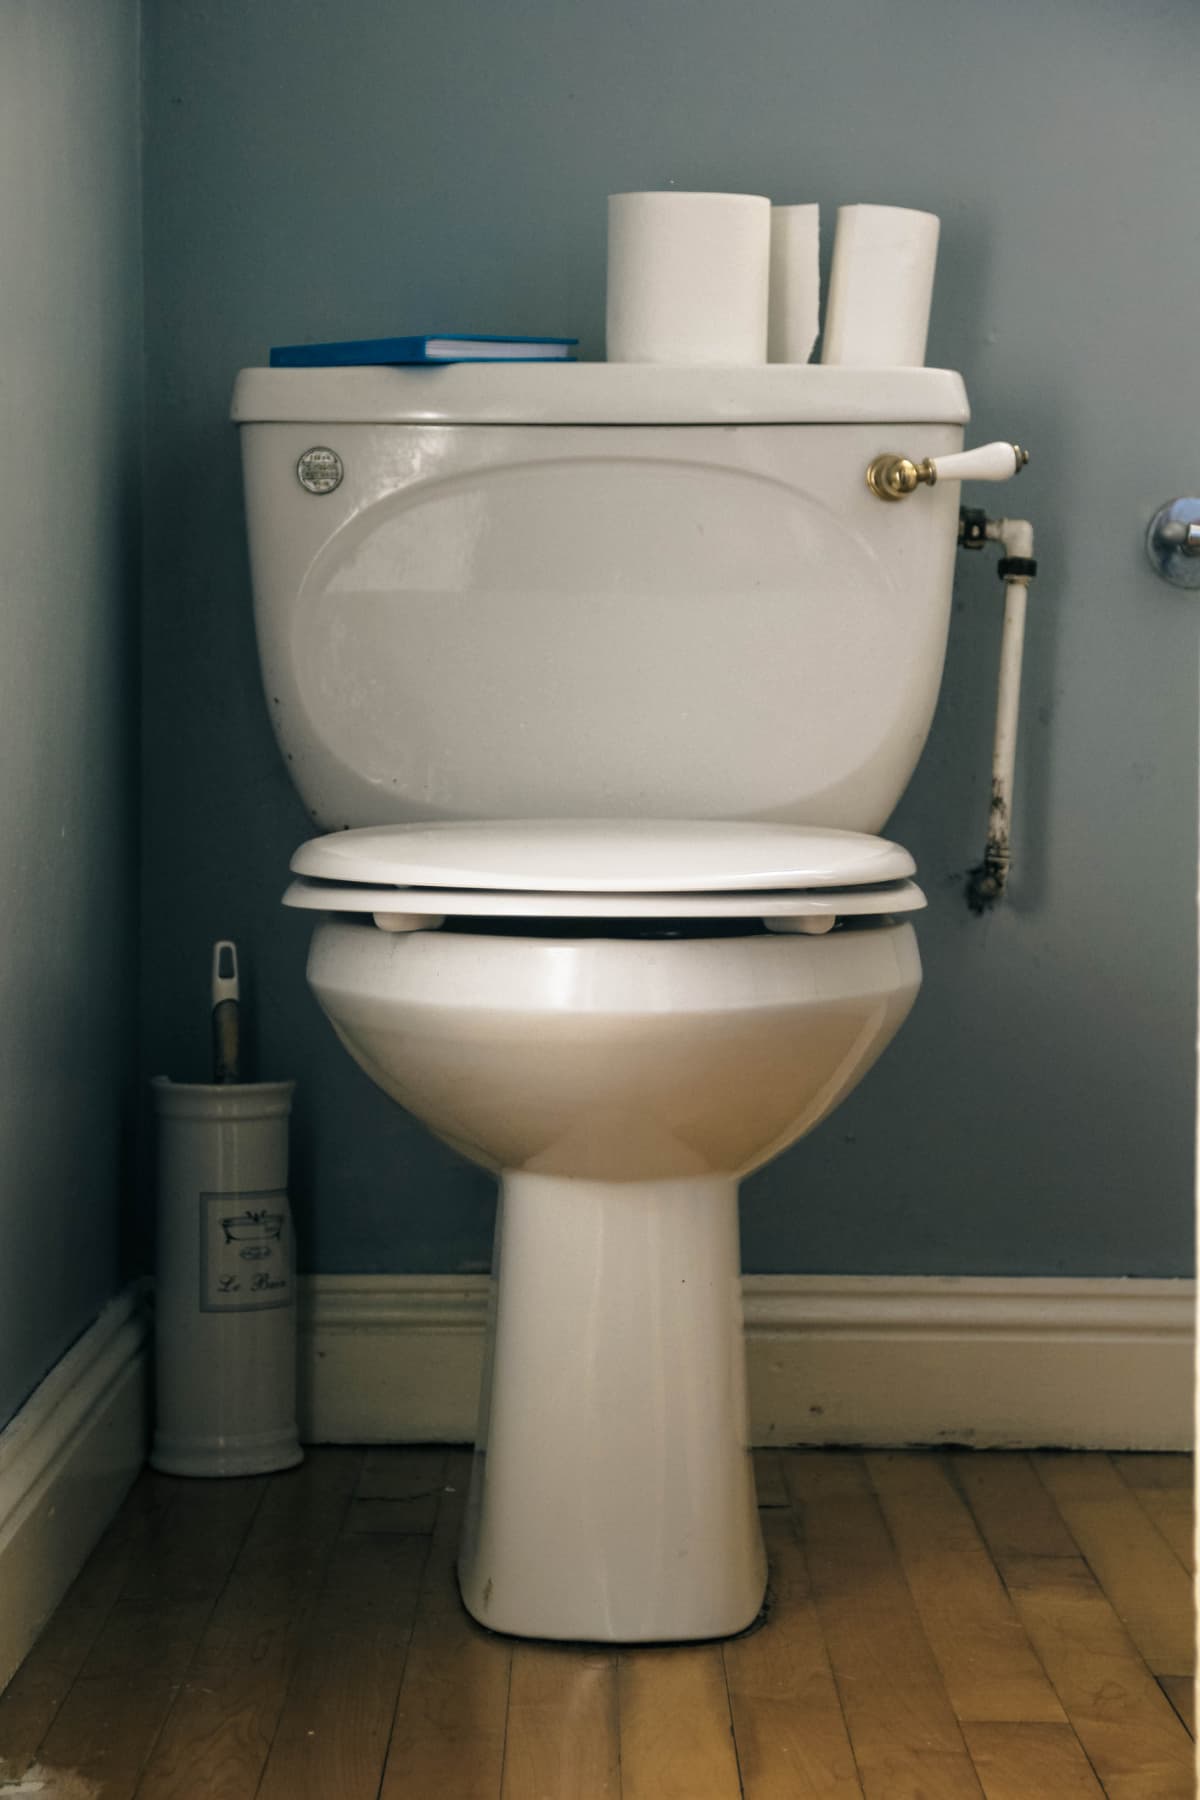 Toilet in the household.